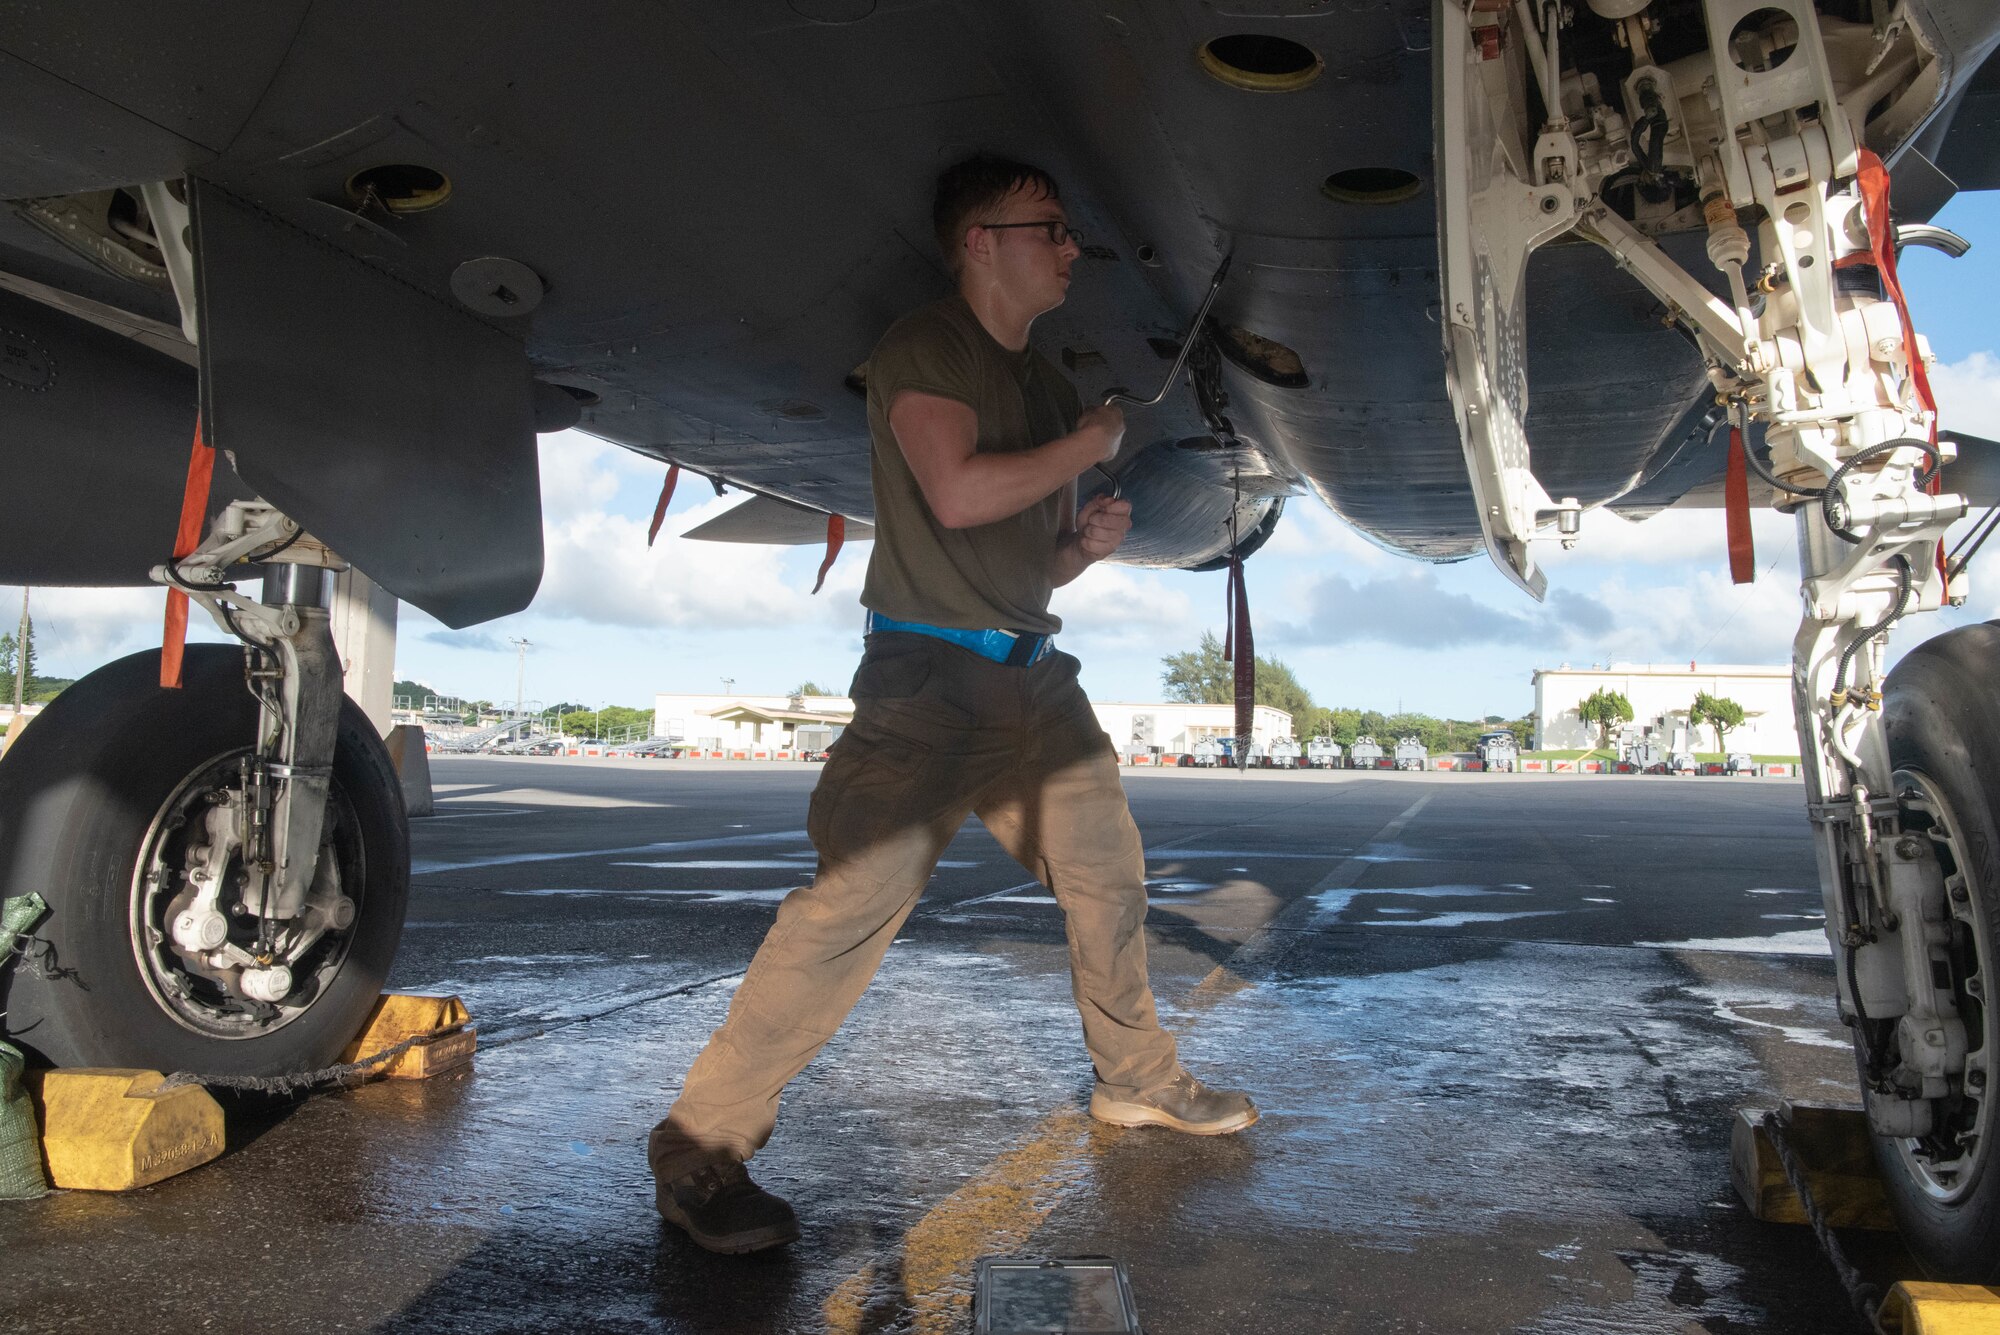 An Airman from the 44th AMU loosens screws from a panel on the underside of an F-15C Eagle.